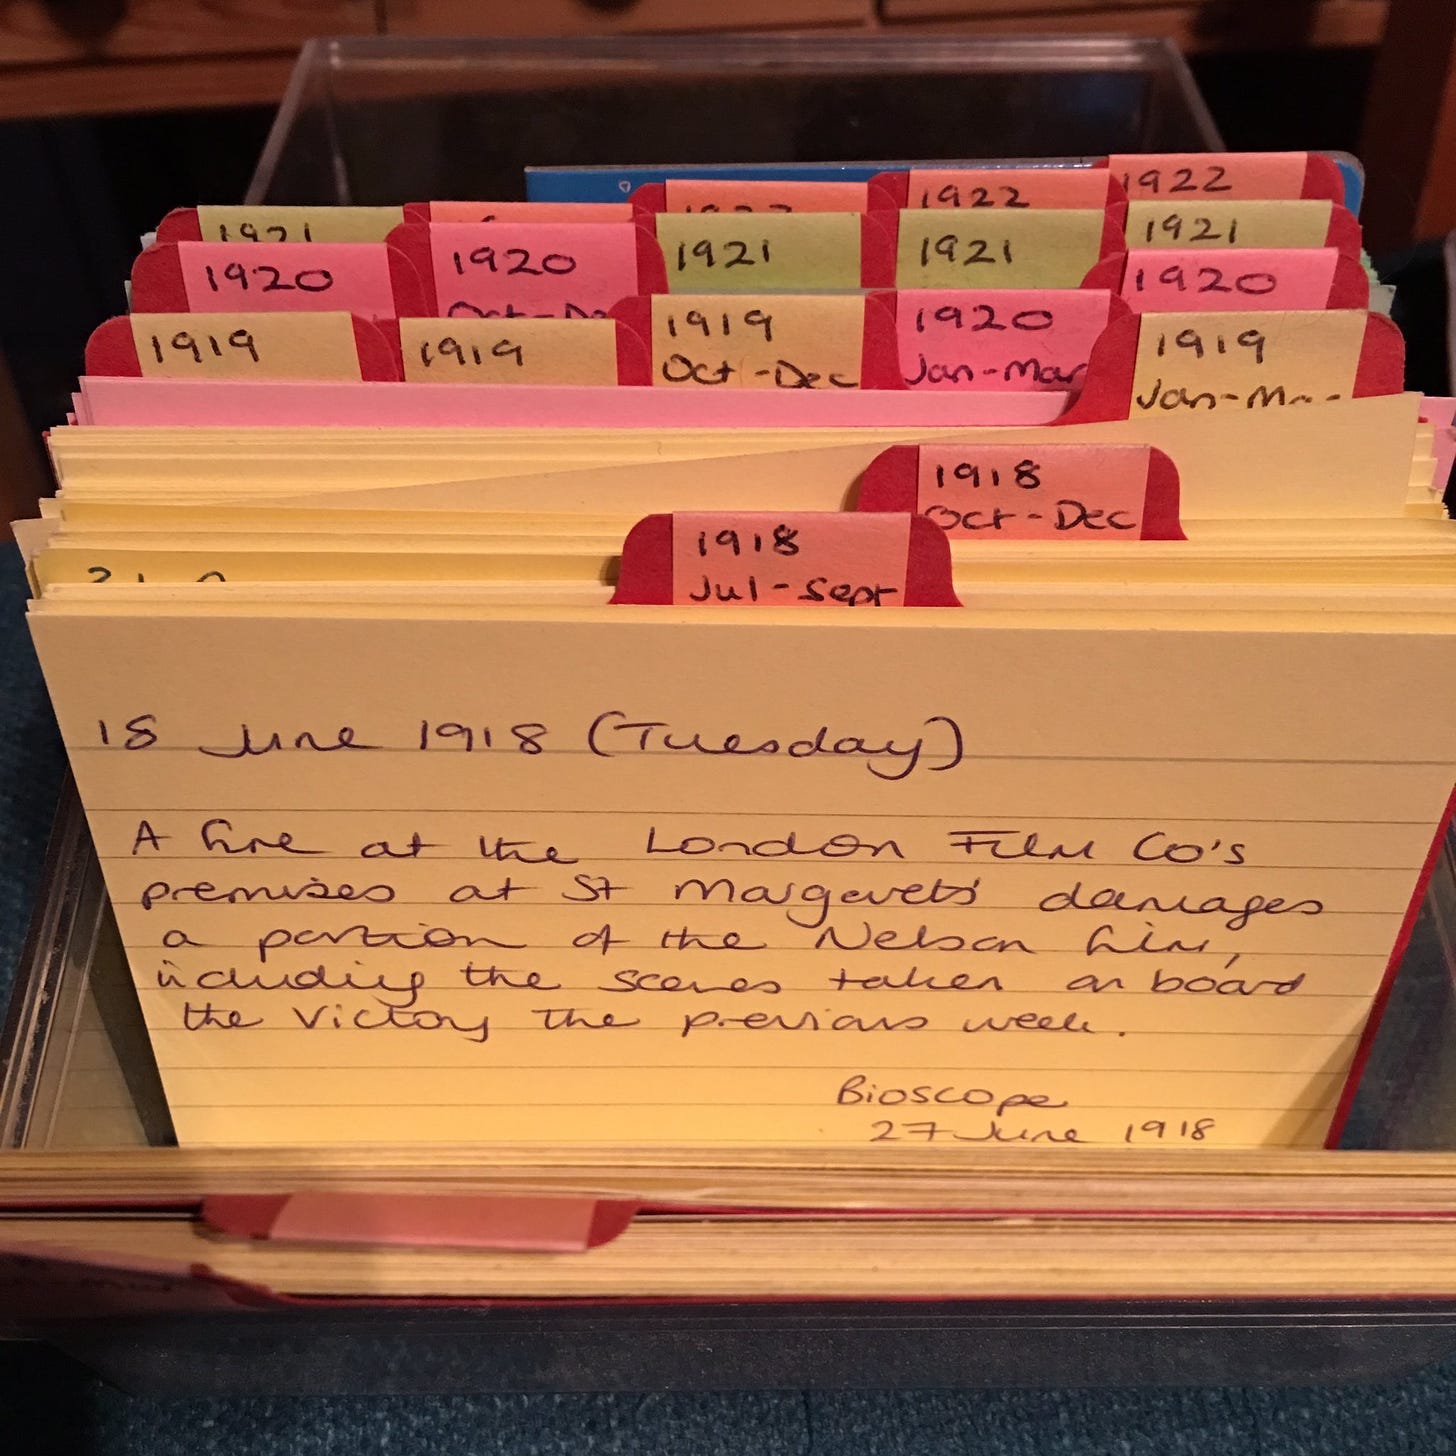 A box of index cards, sorted into dates between 1918 and 1922. The box is open at a card dated 18 June 1918 which details events at a film studio resulting the damage to a film in production